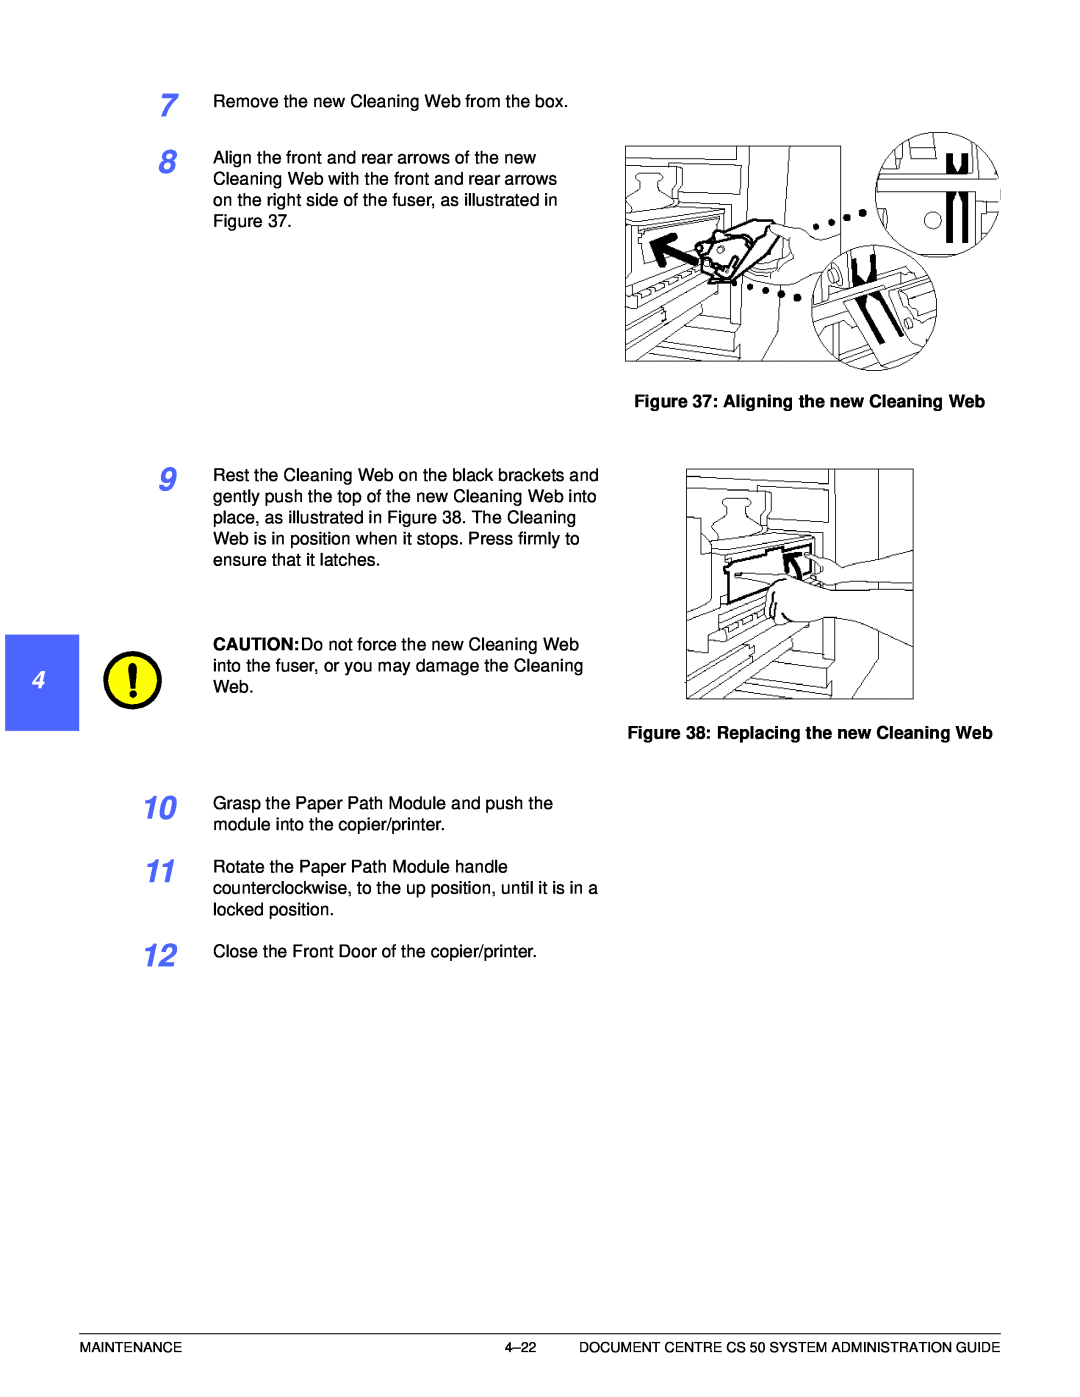 Xerox 50 manual 1 2 4 5 6 7, Aligning the new Cleaning Web, Replacing the new Cleaning Web 